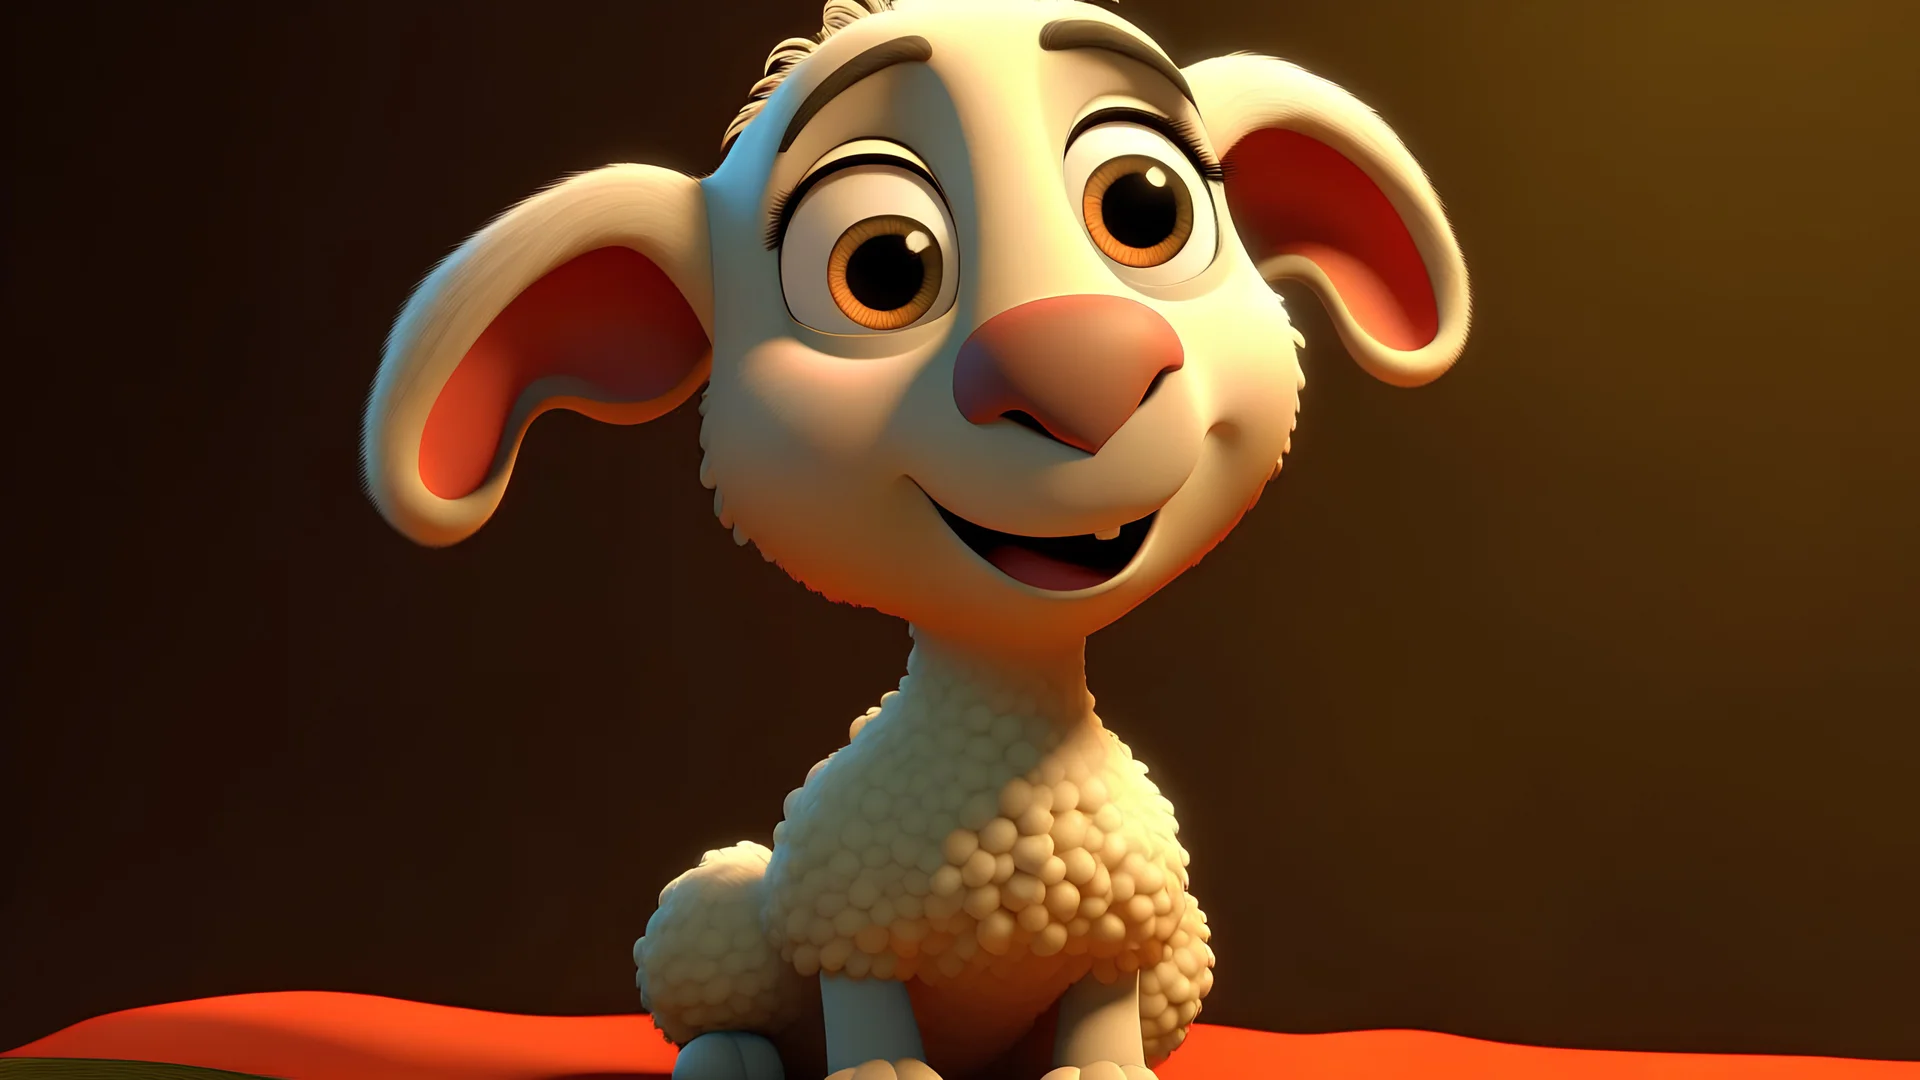 Generate A pixar style lamb for coloing book